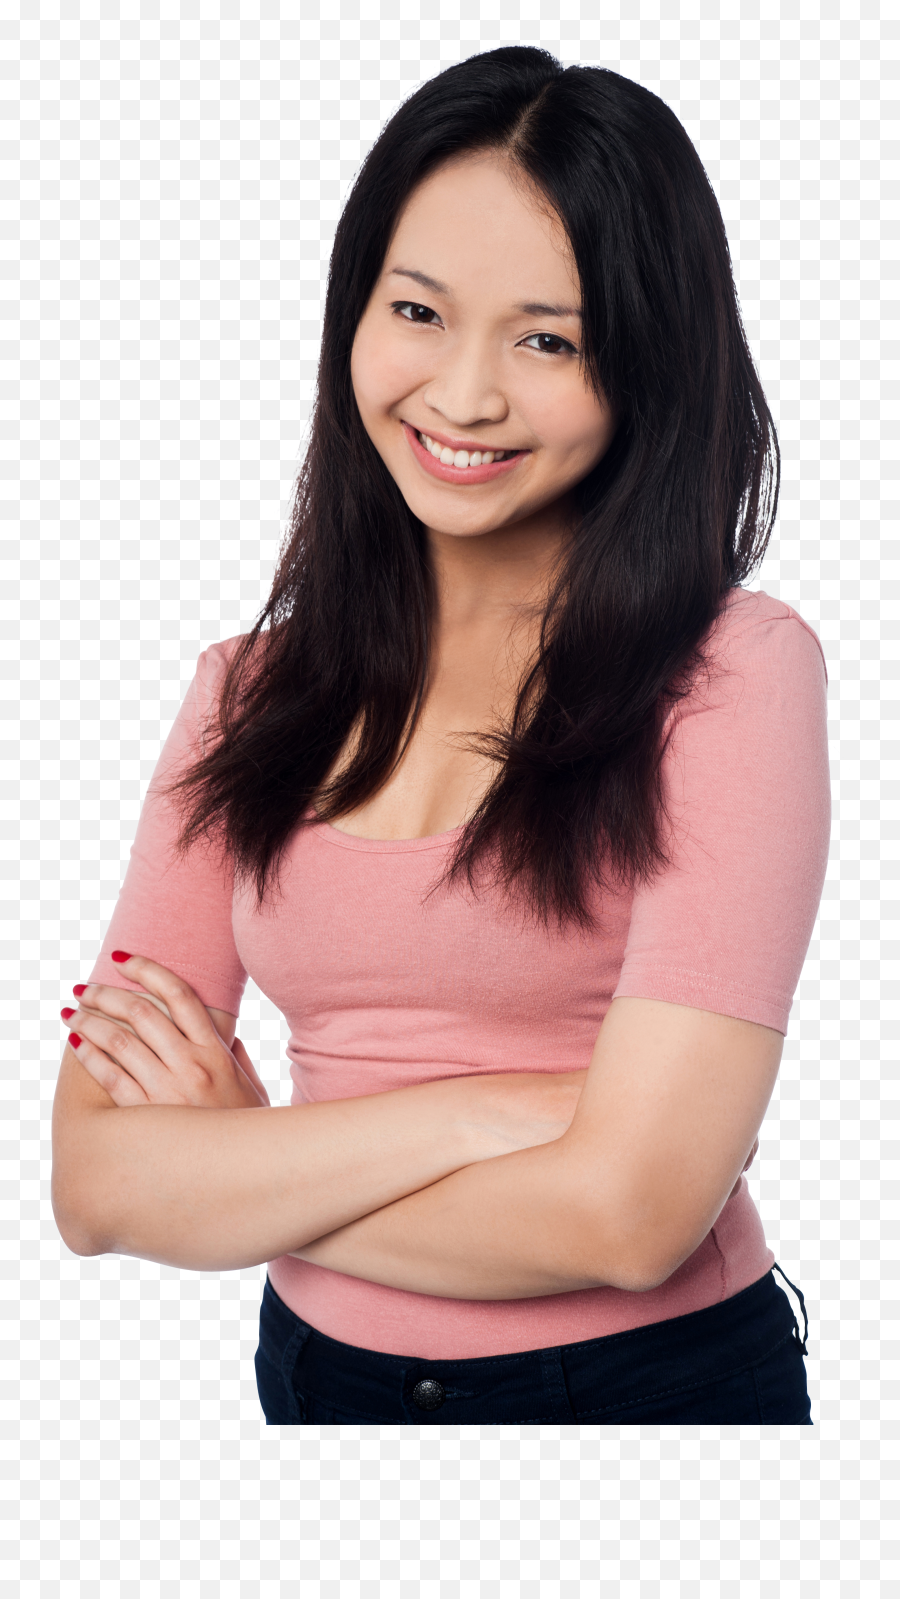 Download Cute Girl Png Image For Free - Portable Network Graphics,Cute Pngs